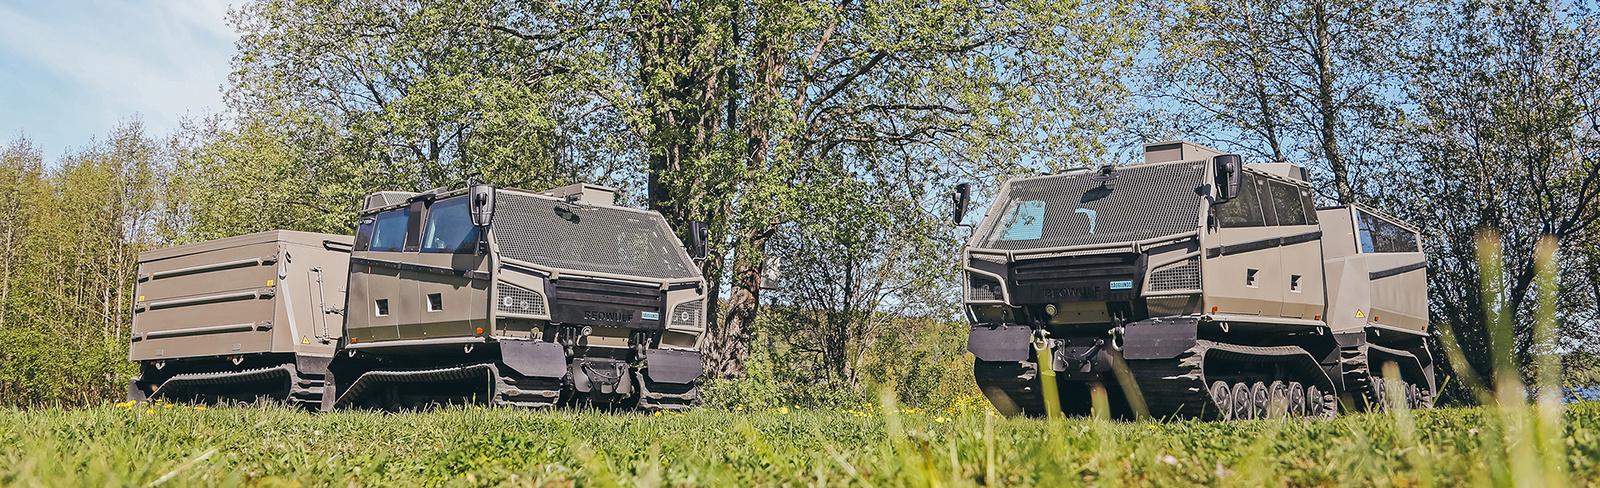 Two Beowulf vehicles angled toward each other in a field